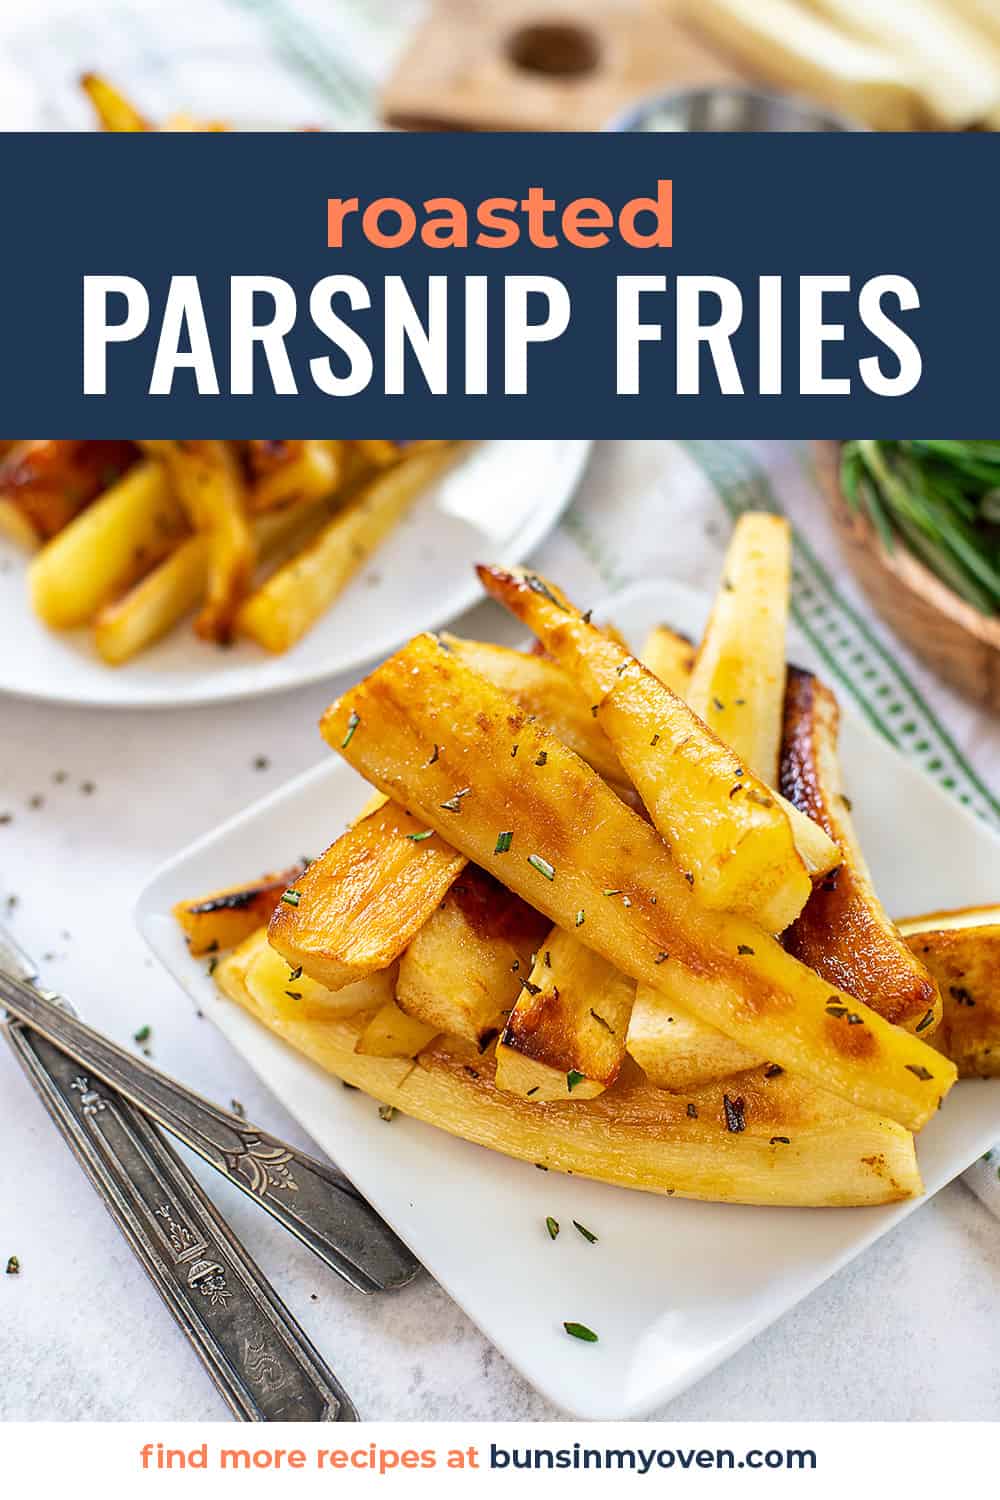 parsnip fries on plate with text for PInterest.